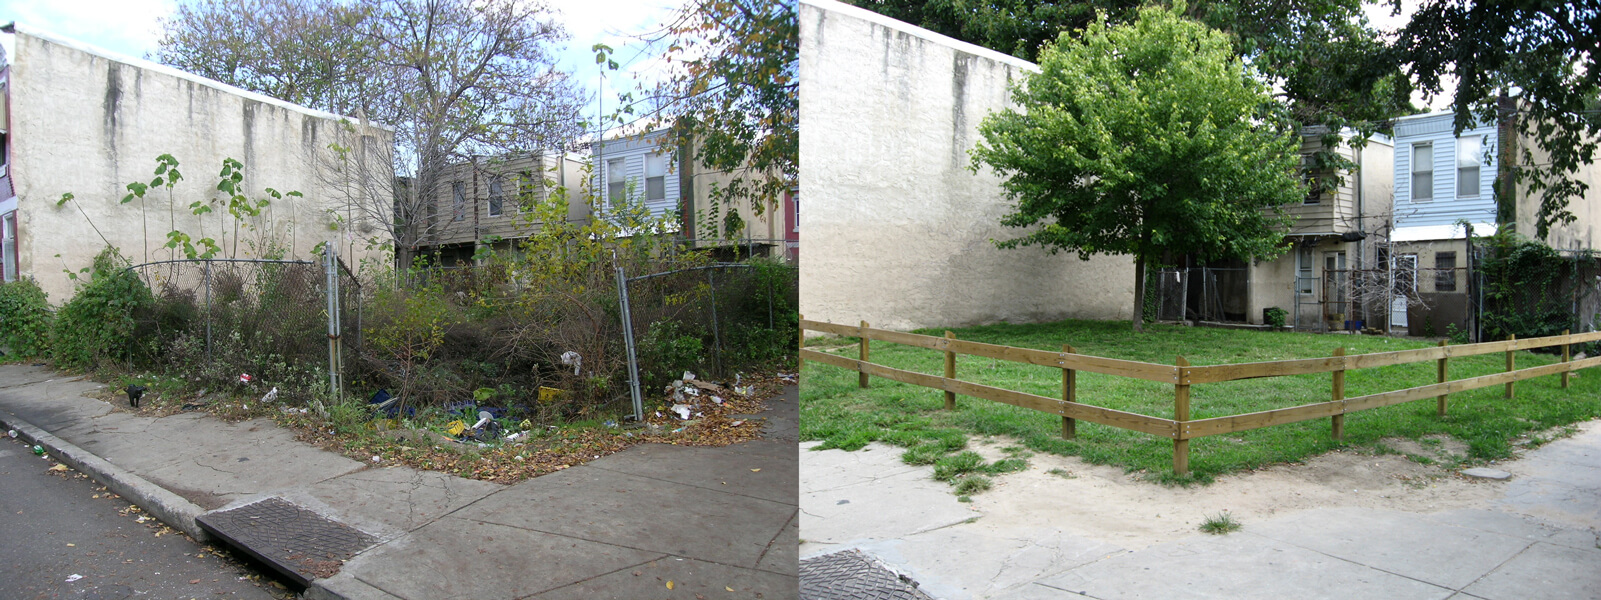 Photograph of a messy vacant lot and another photograph that shows how it looked after it was cleared of trash, fenced and planted with grass. Tidying up urban blight like this may help to reduce crime rates.